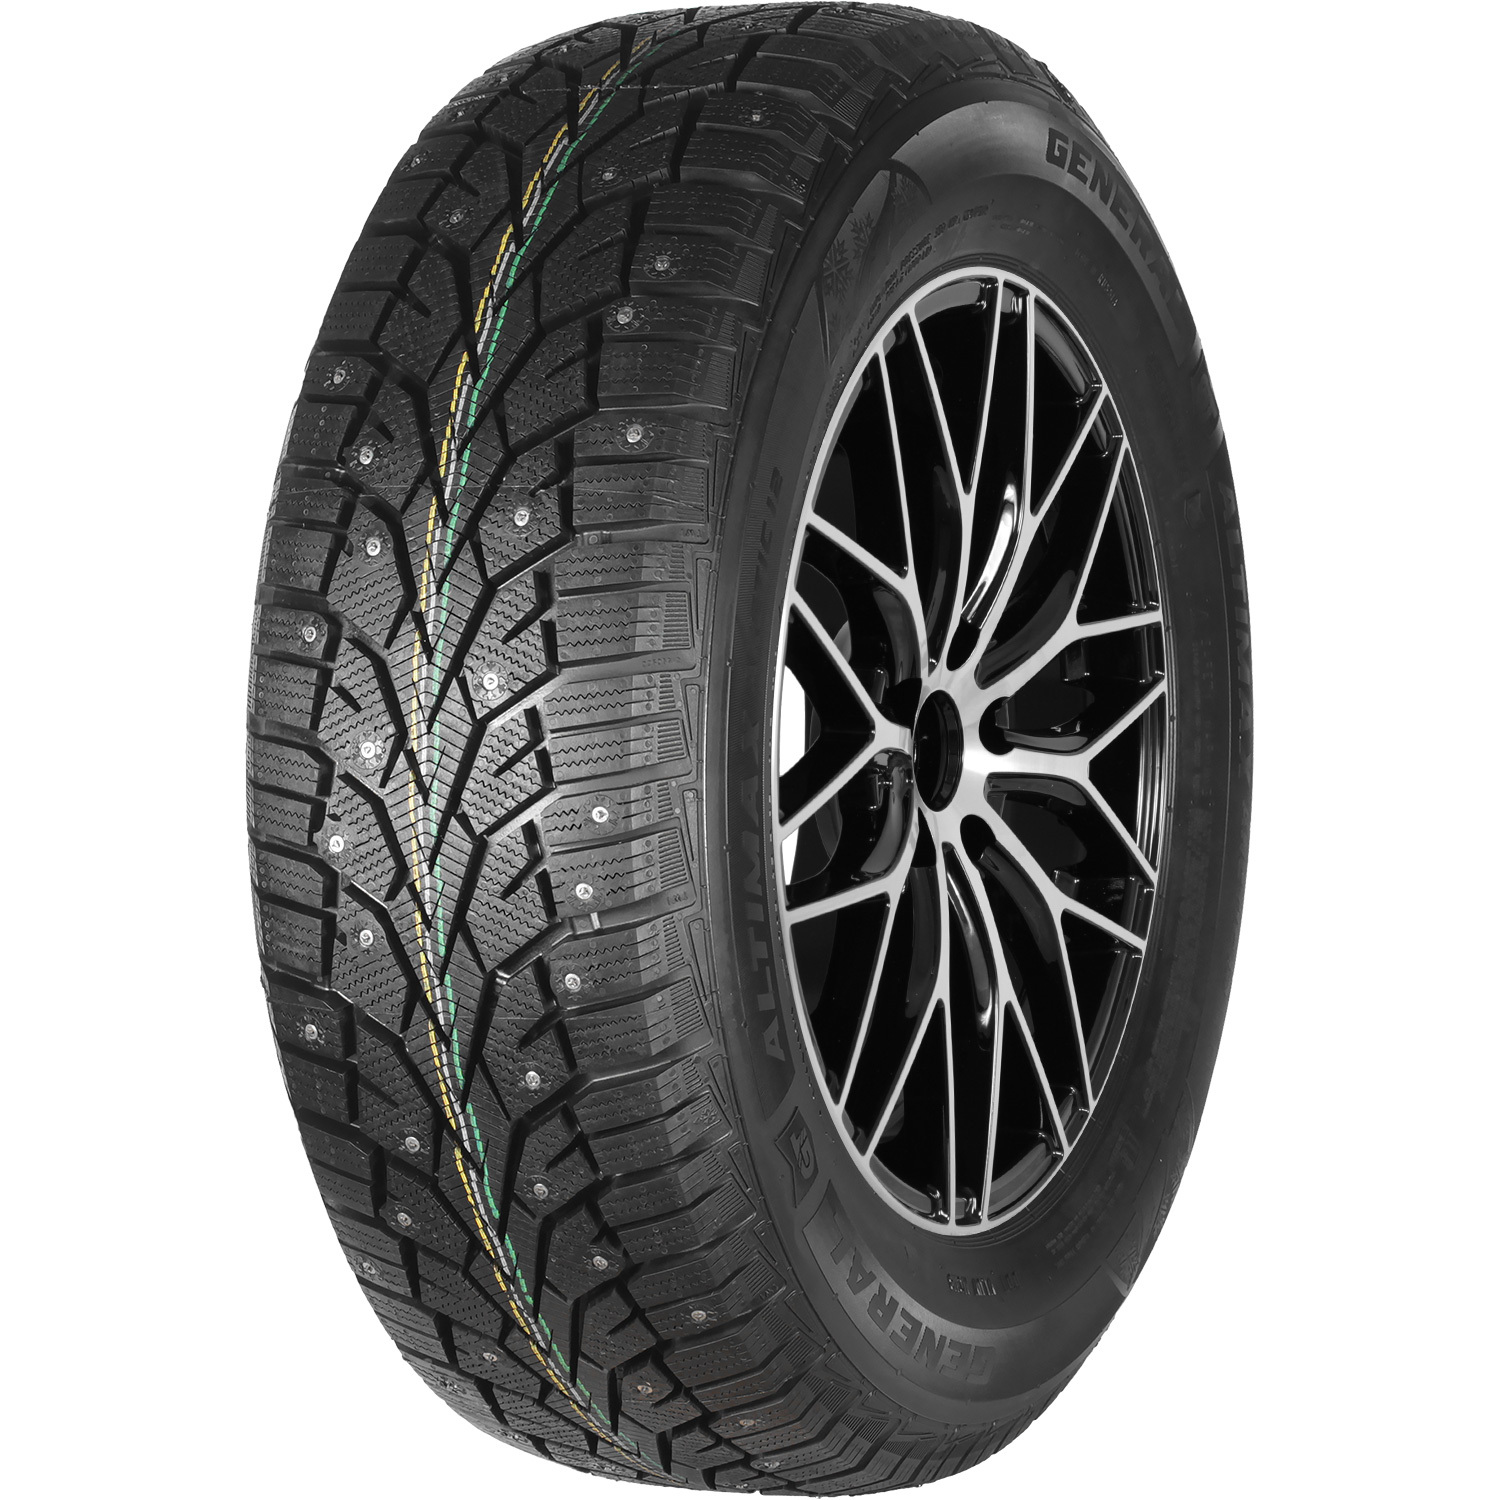 Автомобильная шина General Tire Altimax Arctic 12 215/60 R16 99T Шипованные camping spare tire cover car accessories custom spare tire covers your own personalized design tire protectors